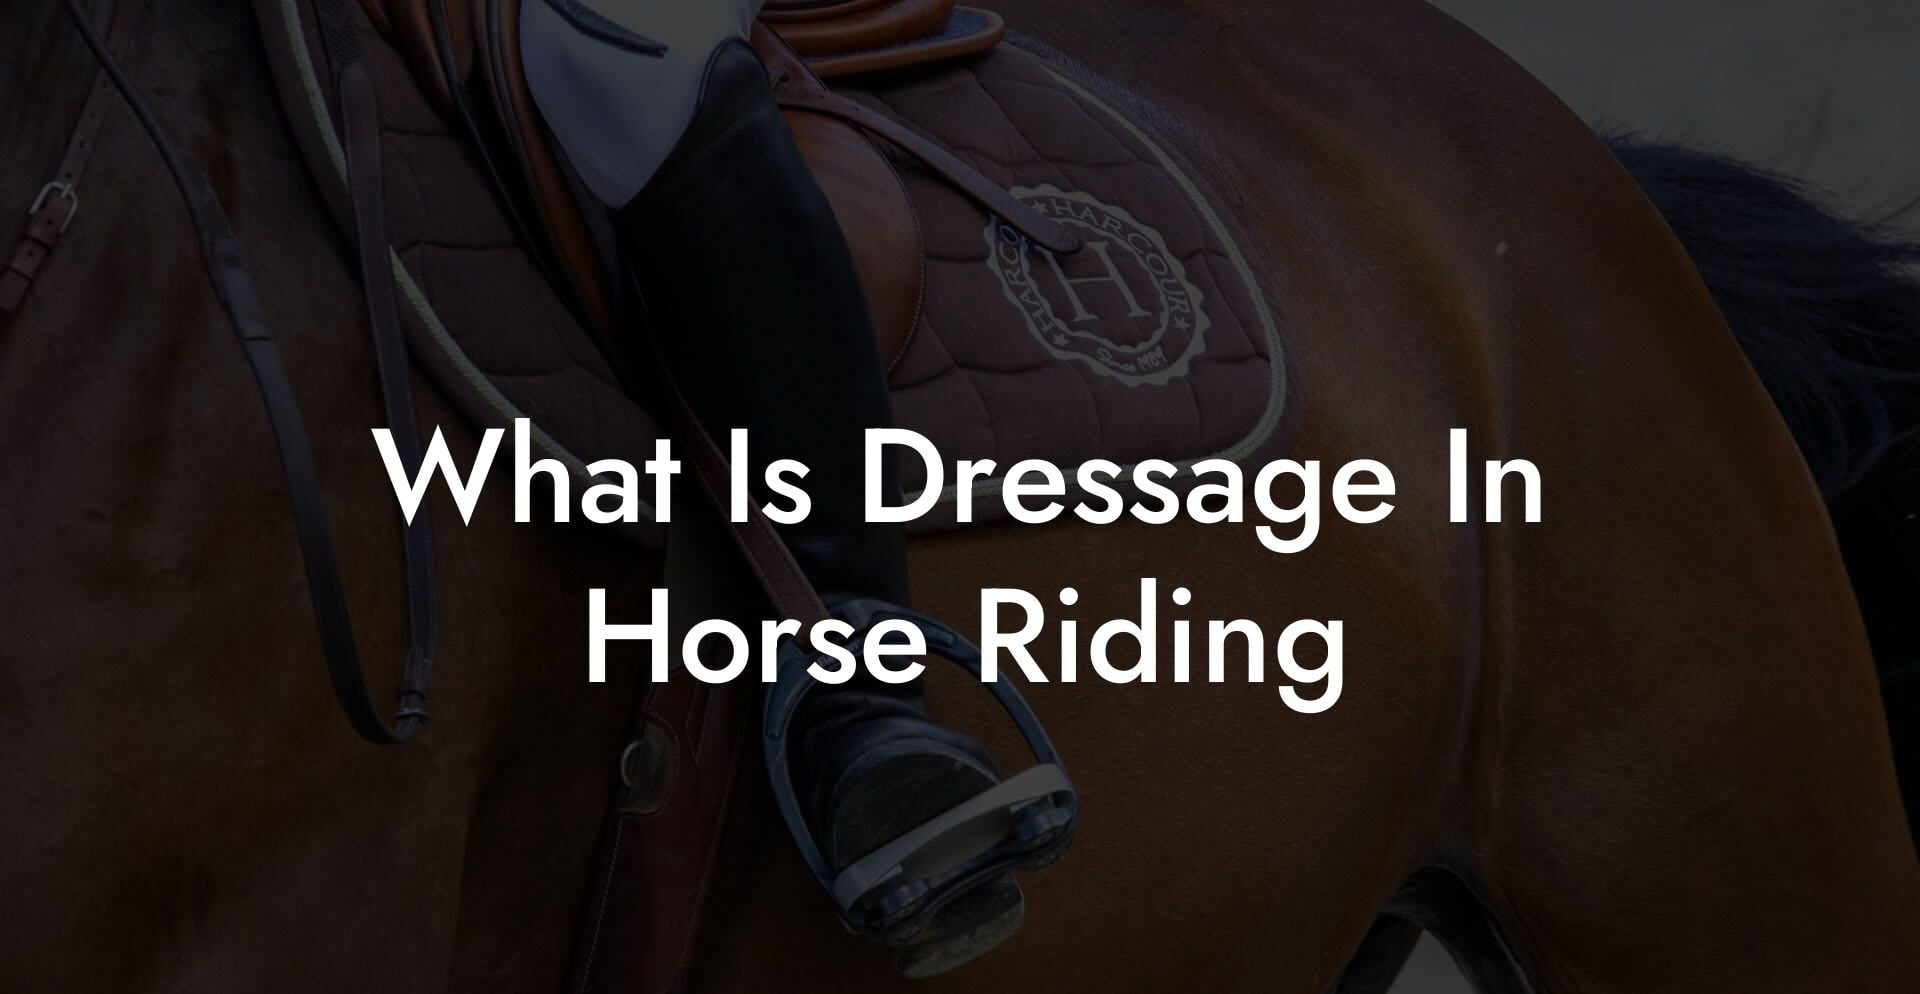 What Is Dressage In Horse Riding